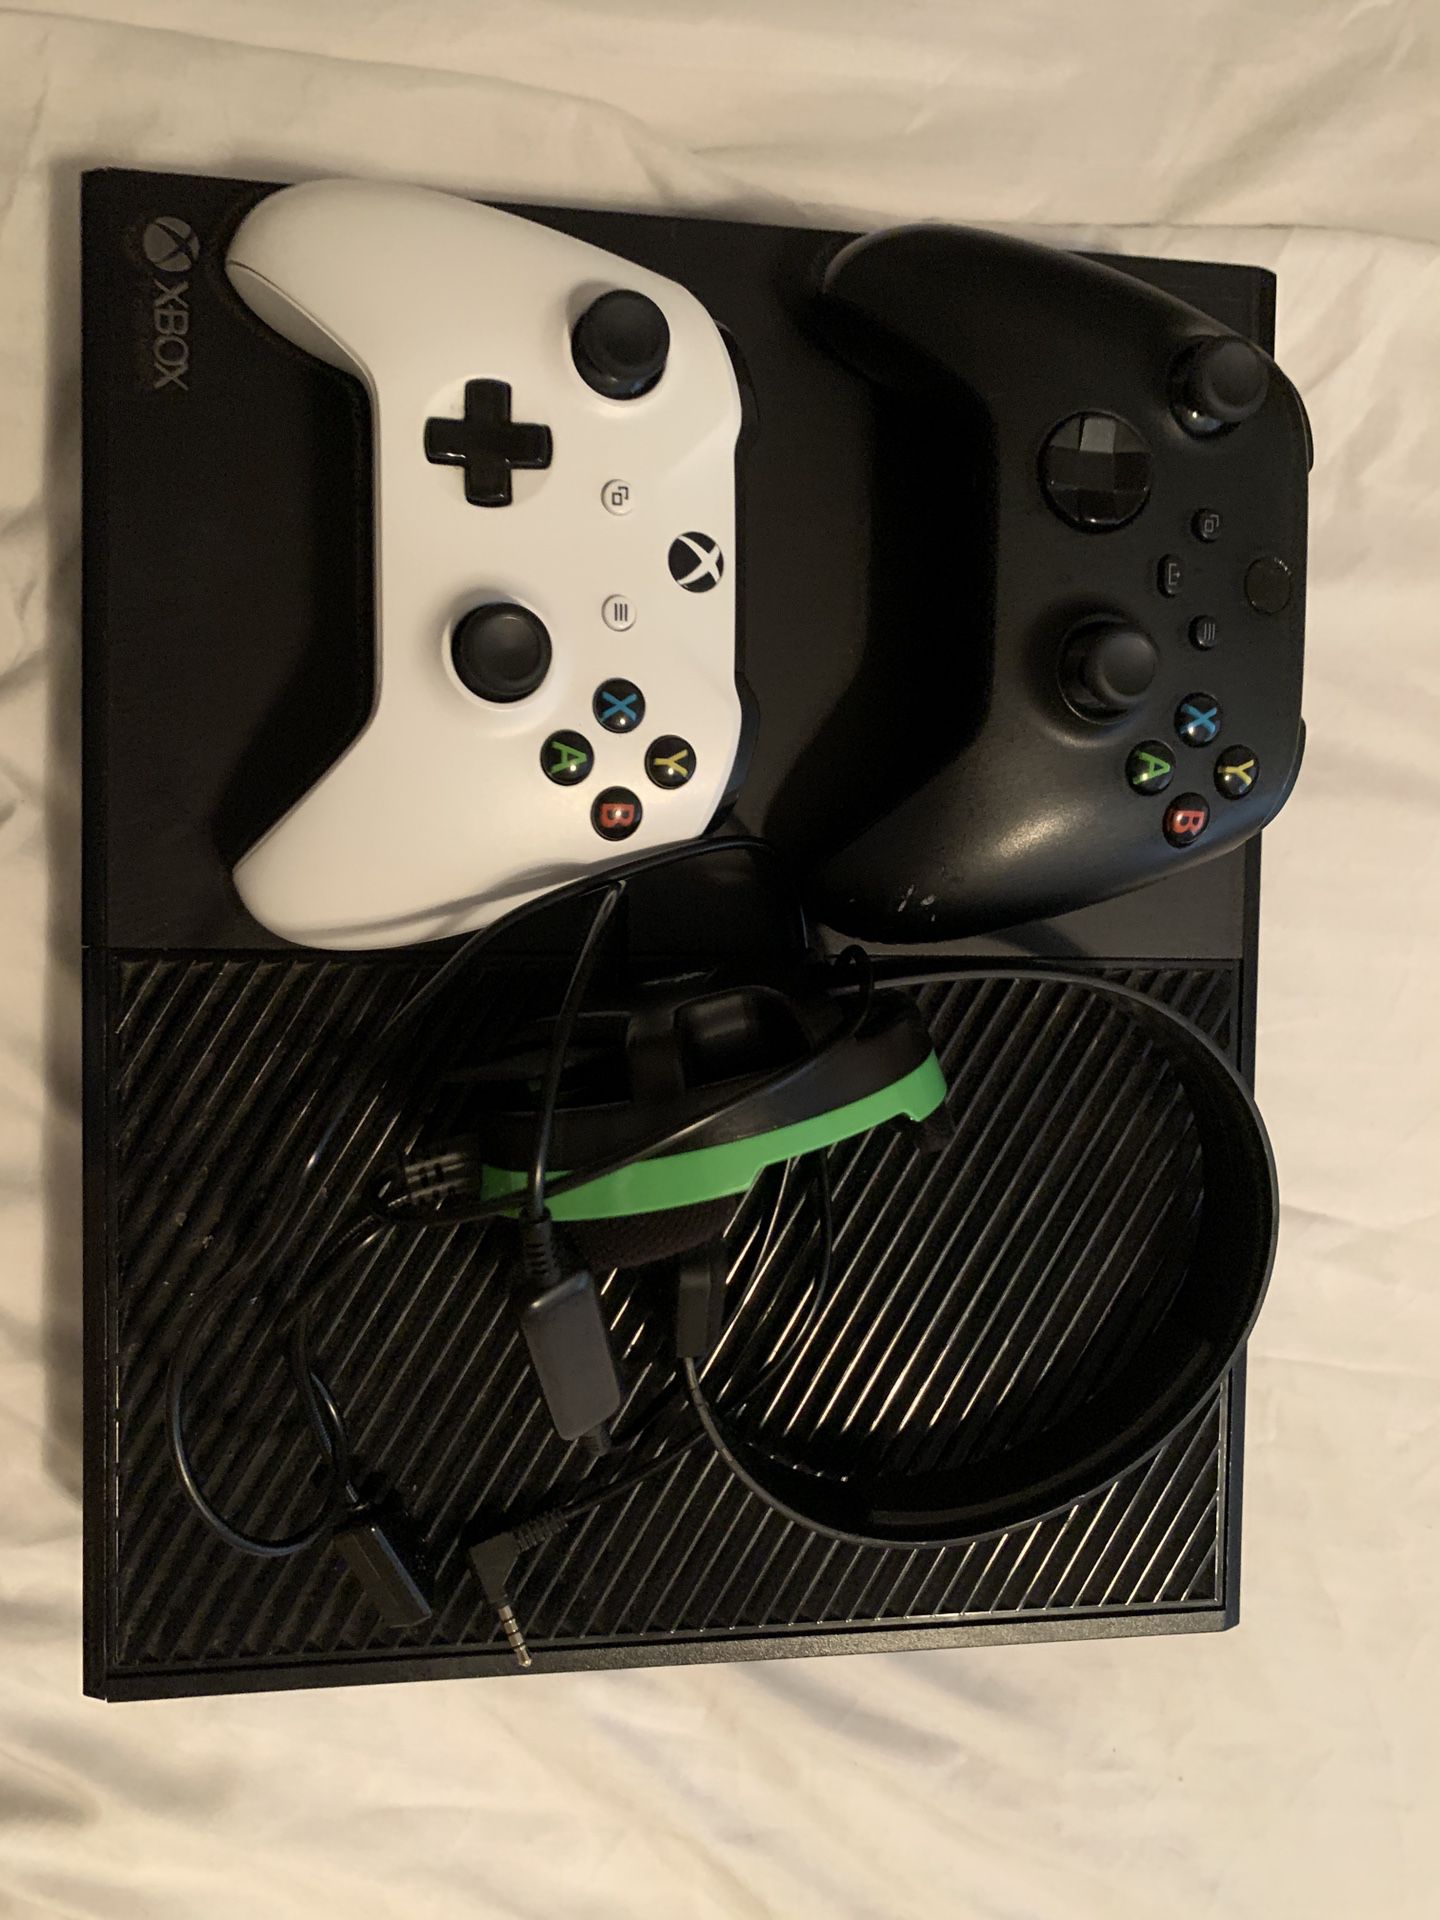 Xbox One Comes With 2 Controllers And A Turtle Beach Headset